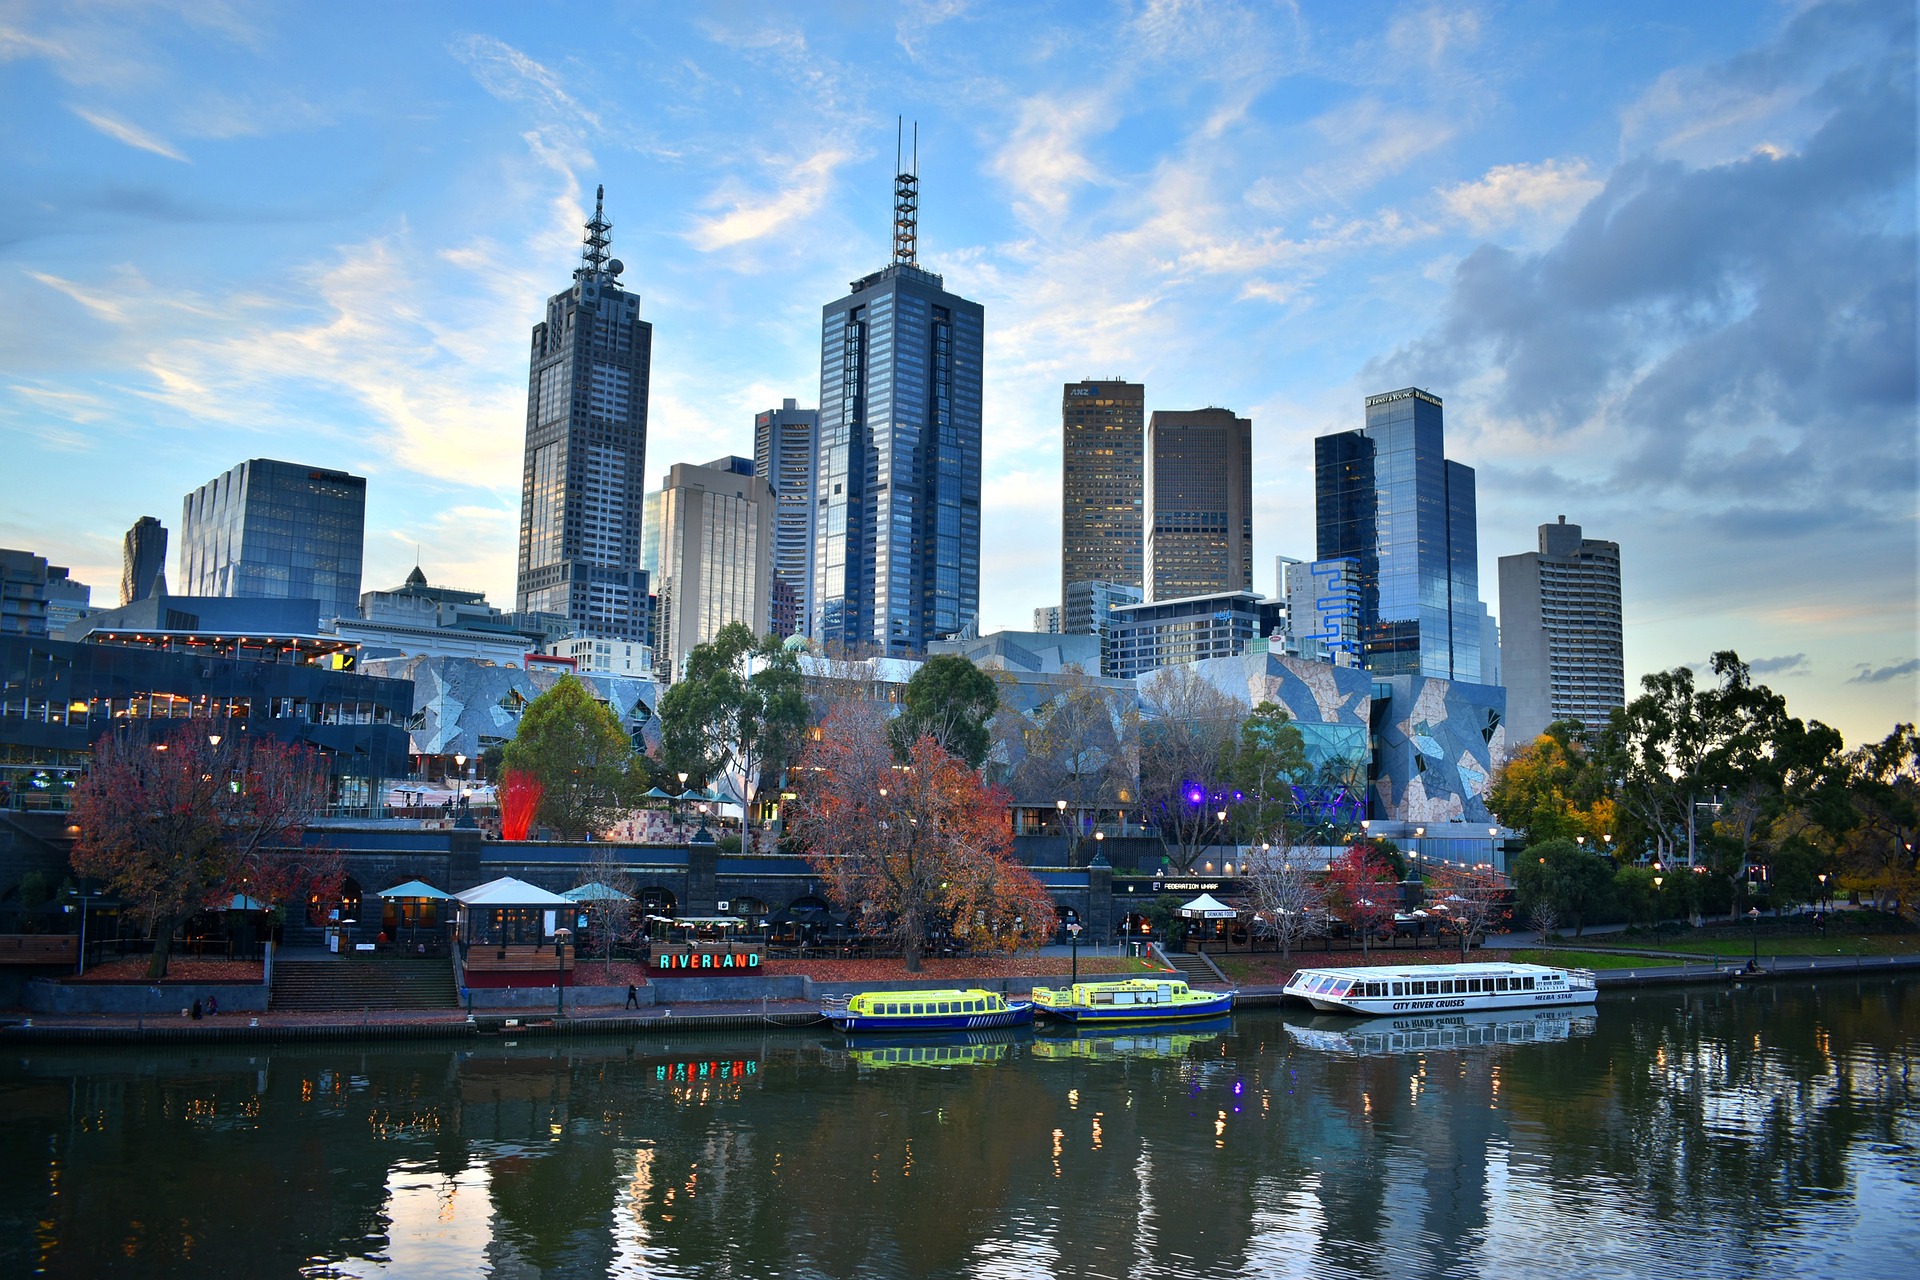 An image of the waterfront and the Melbourne river boat cruise